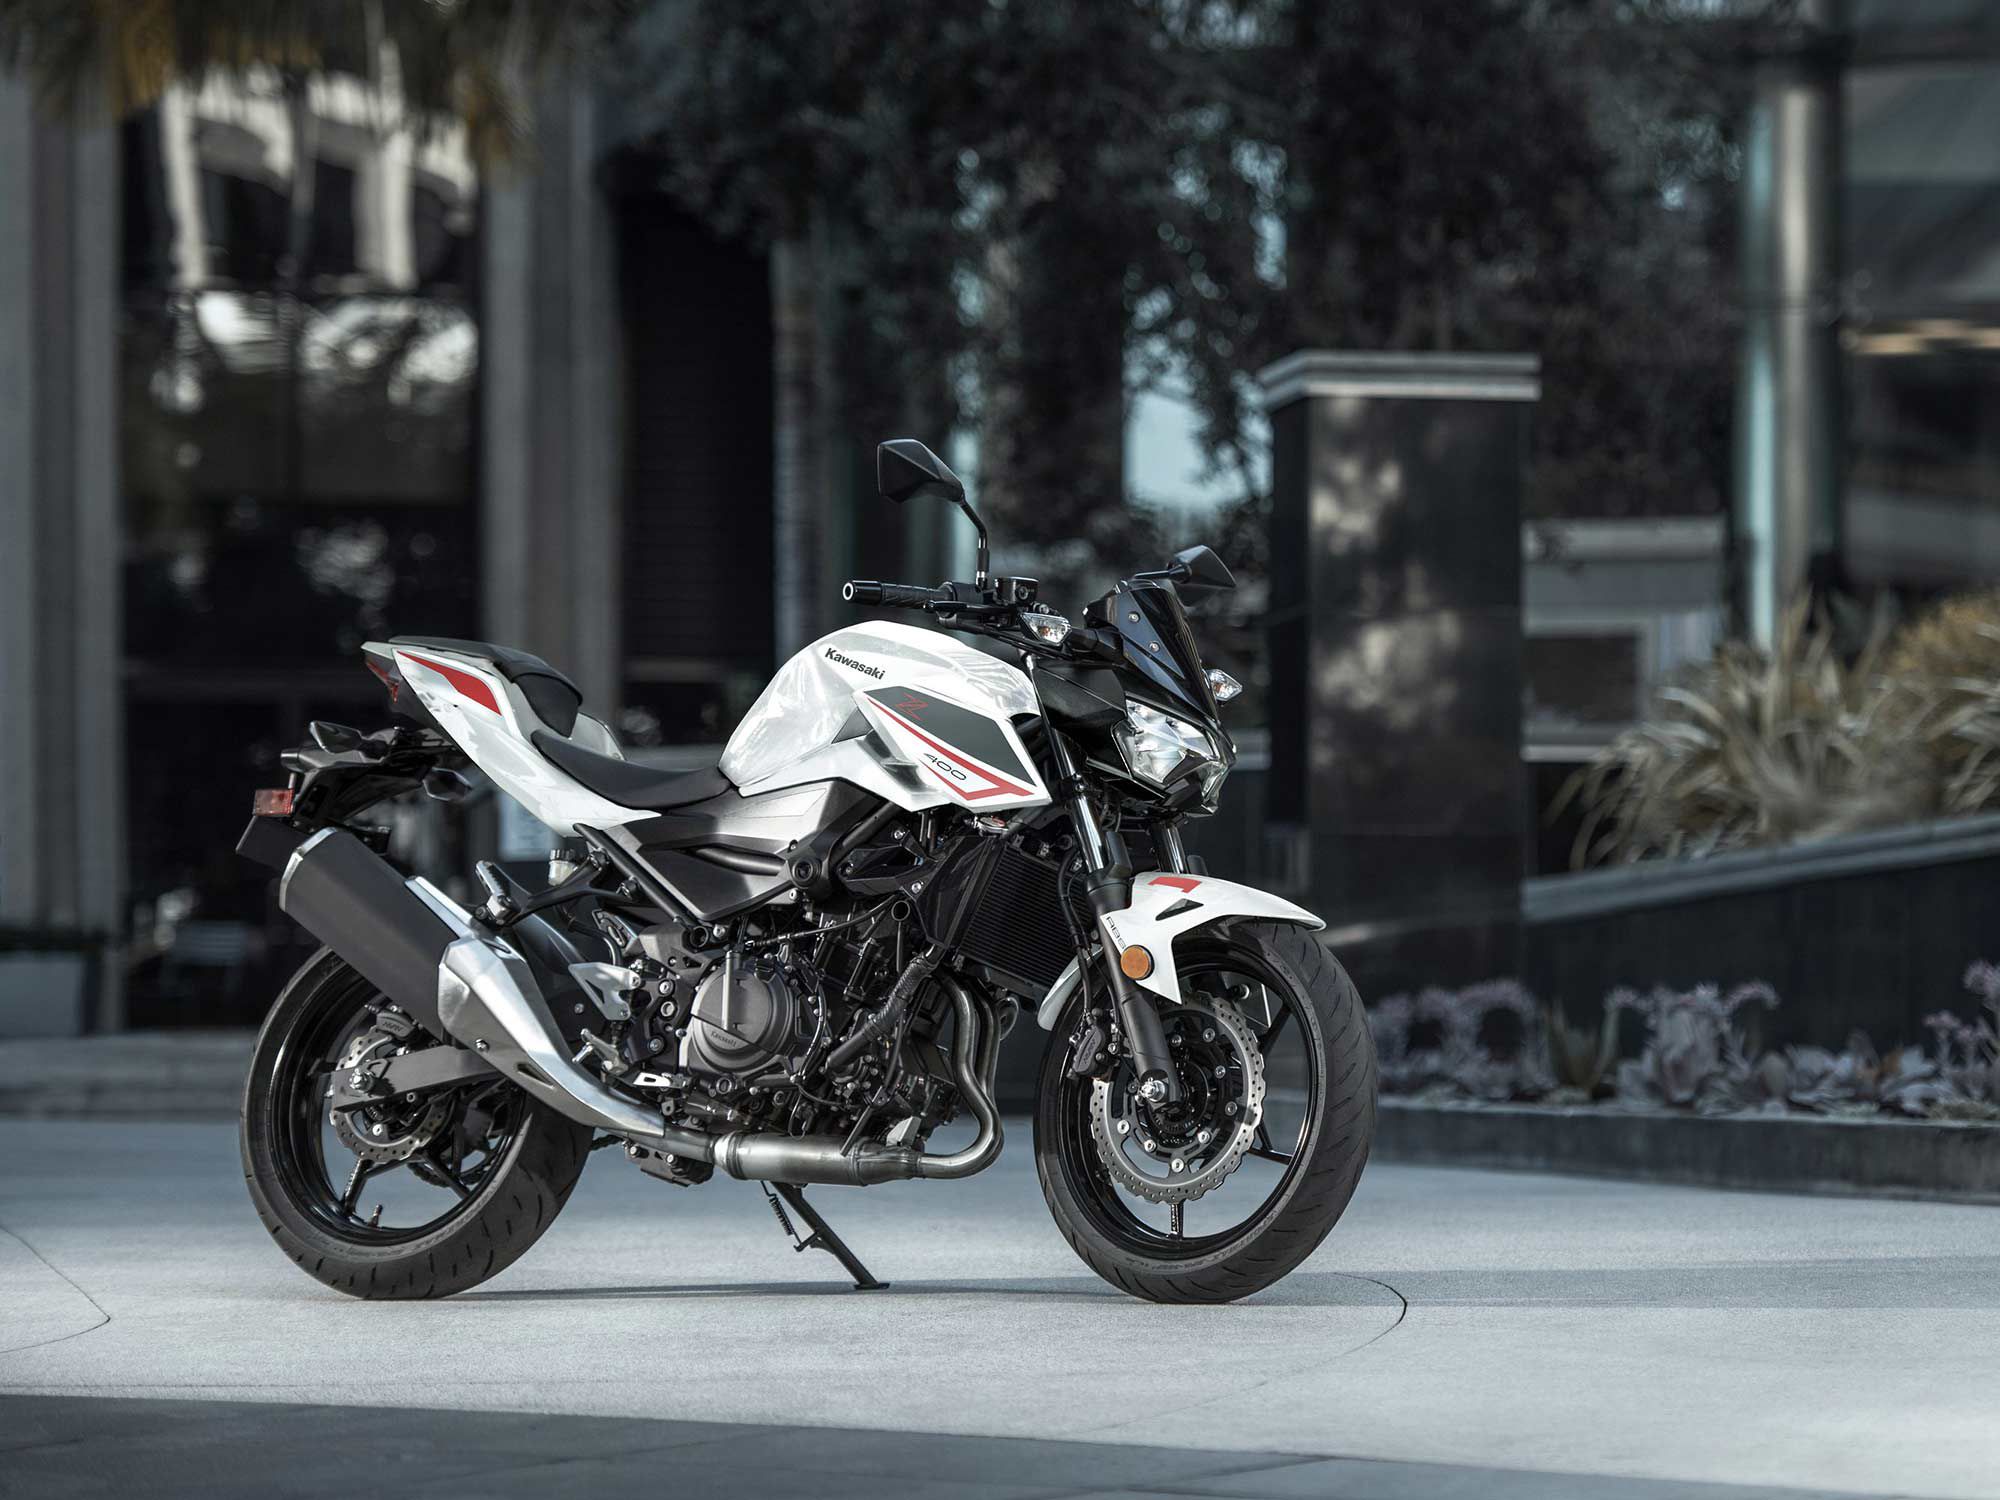 Kawasaki’s Z400 returns with two new color options for the 2023 model year.